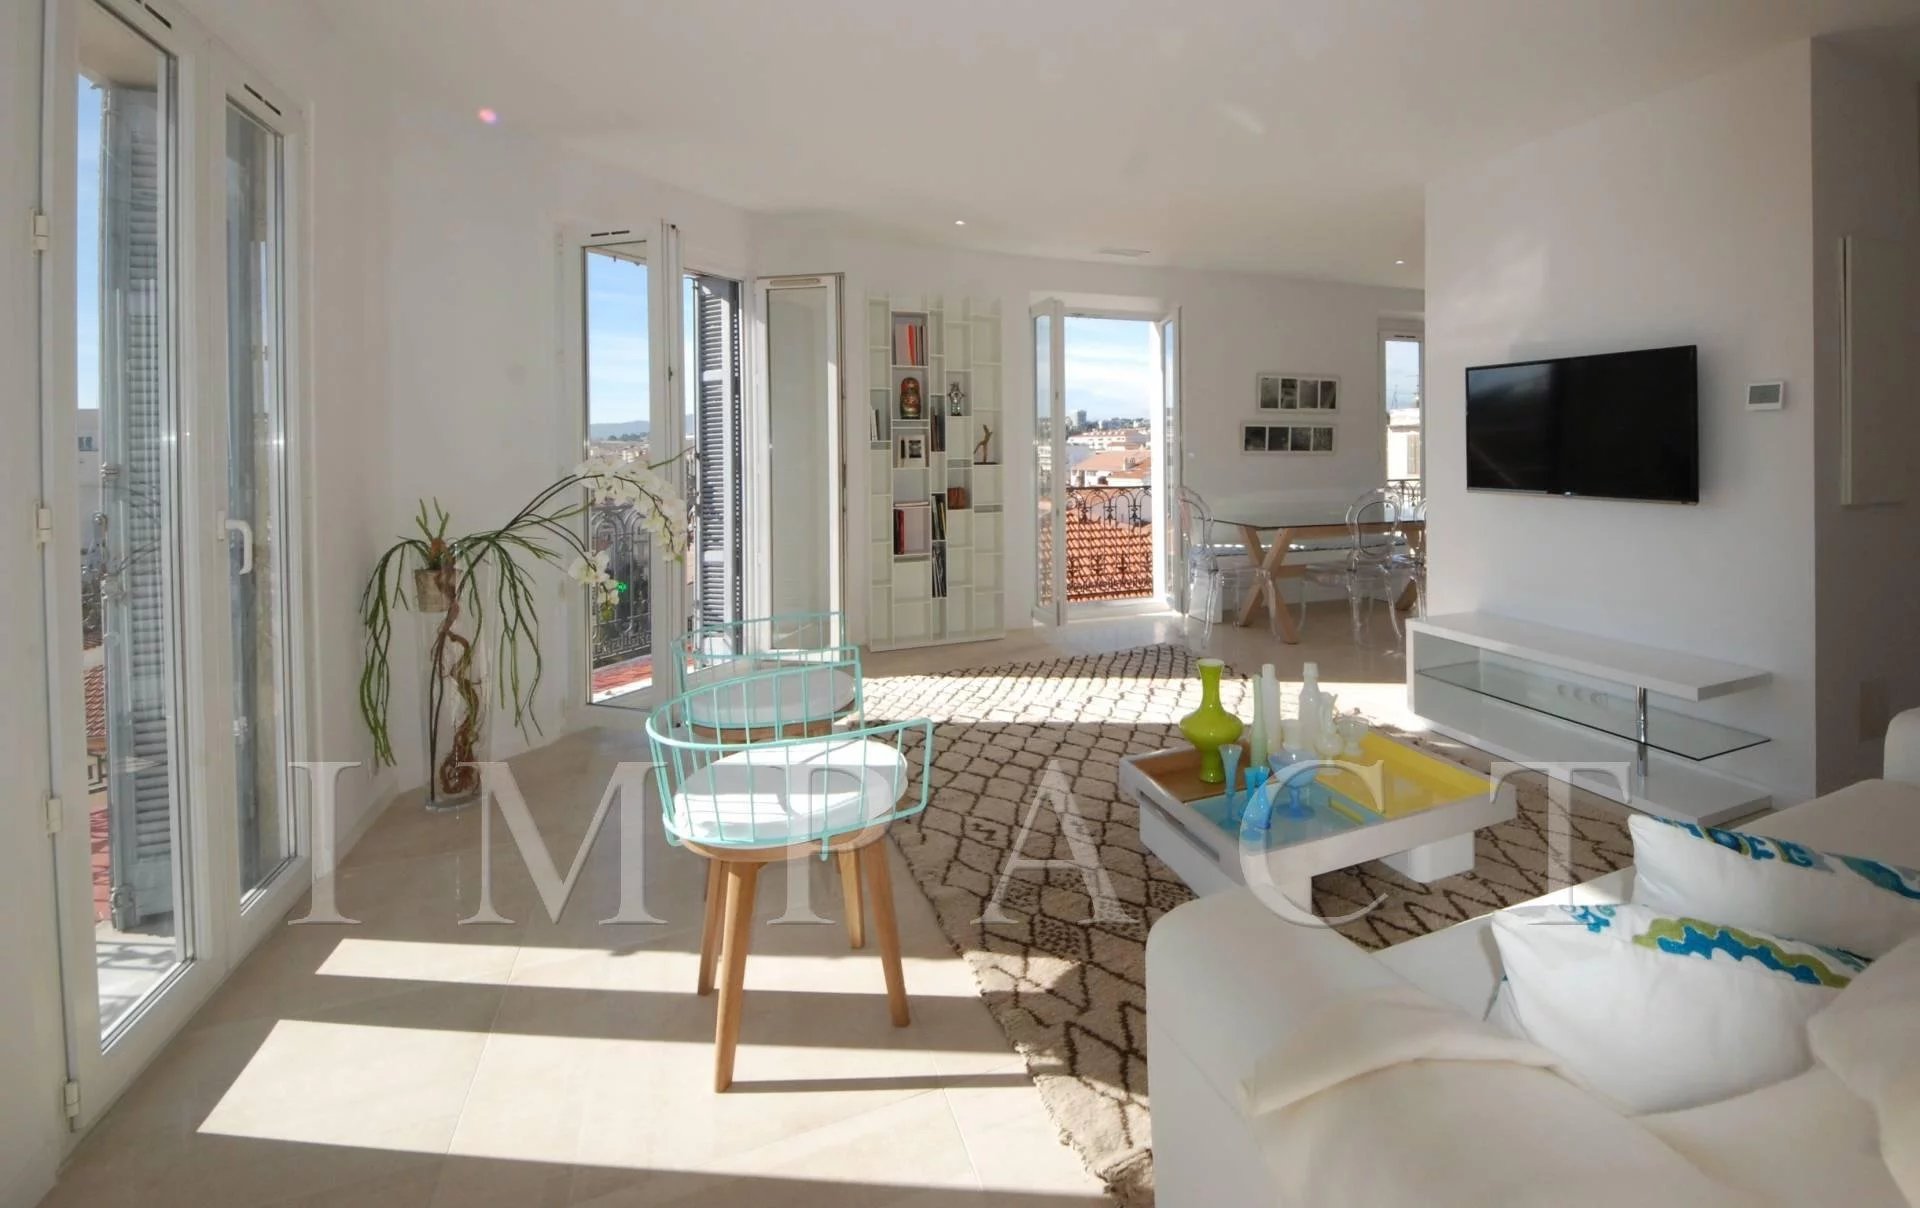 Apartment to rent in the center of Cannes